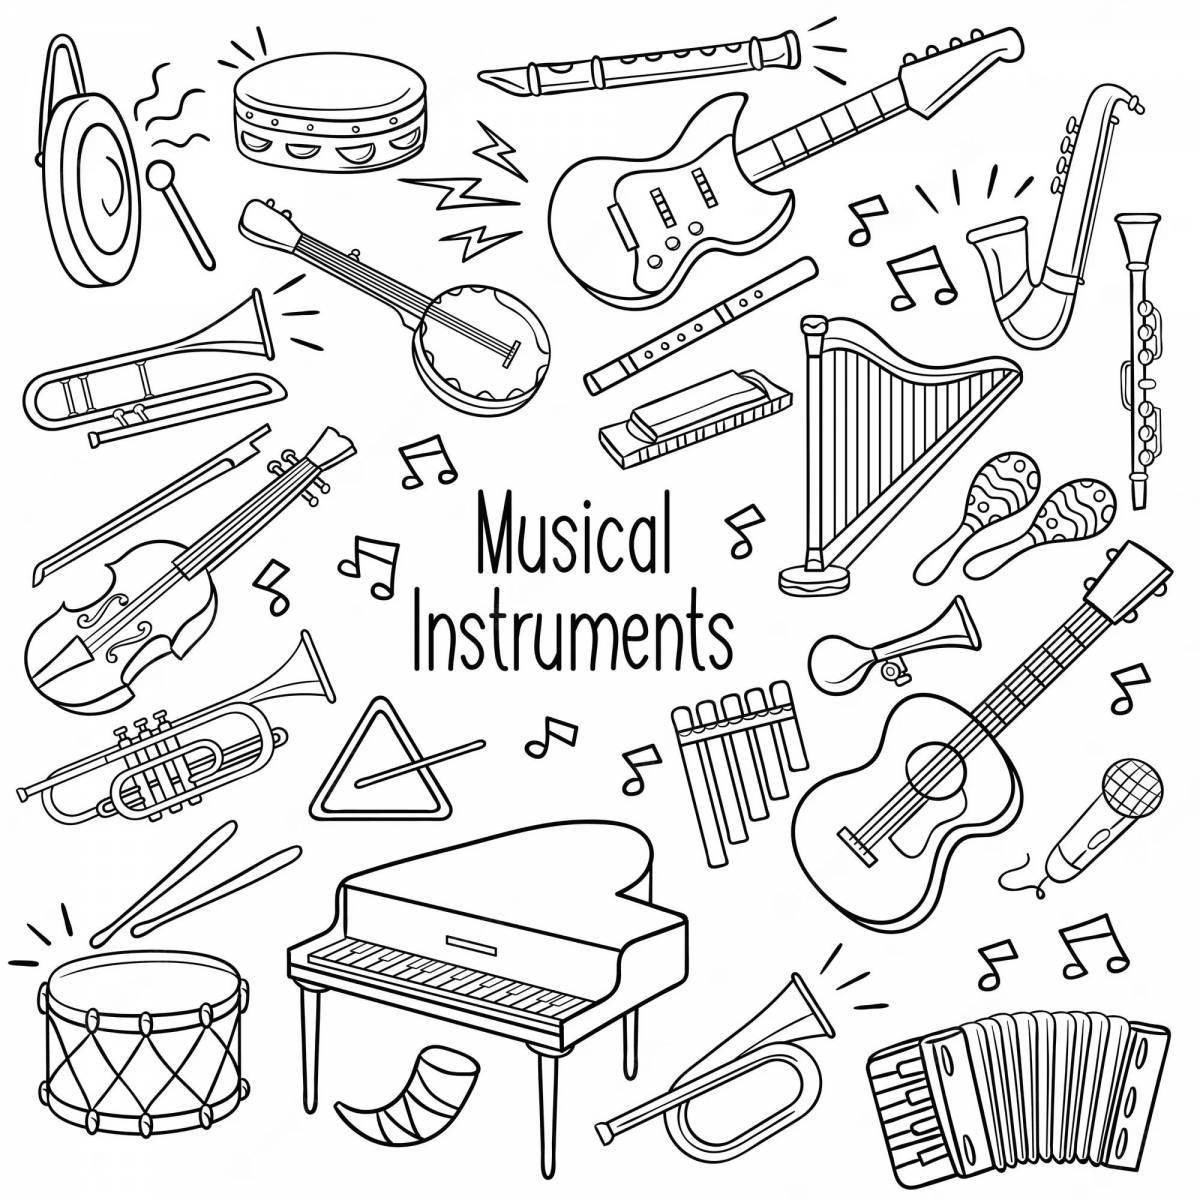 Coloring page marvelous musical instruments